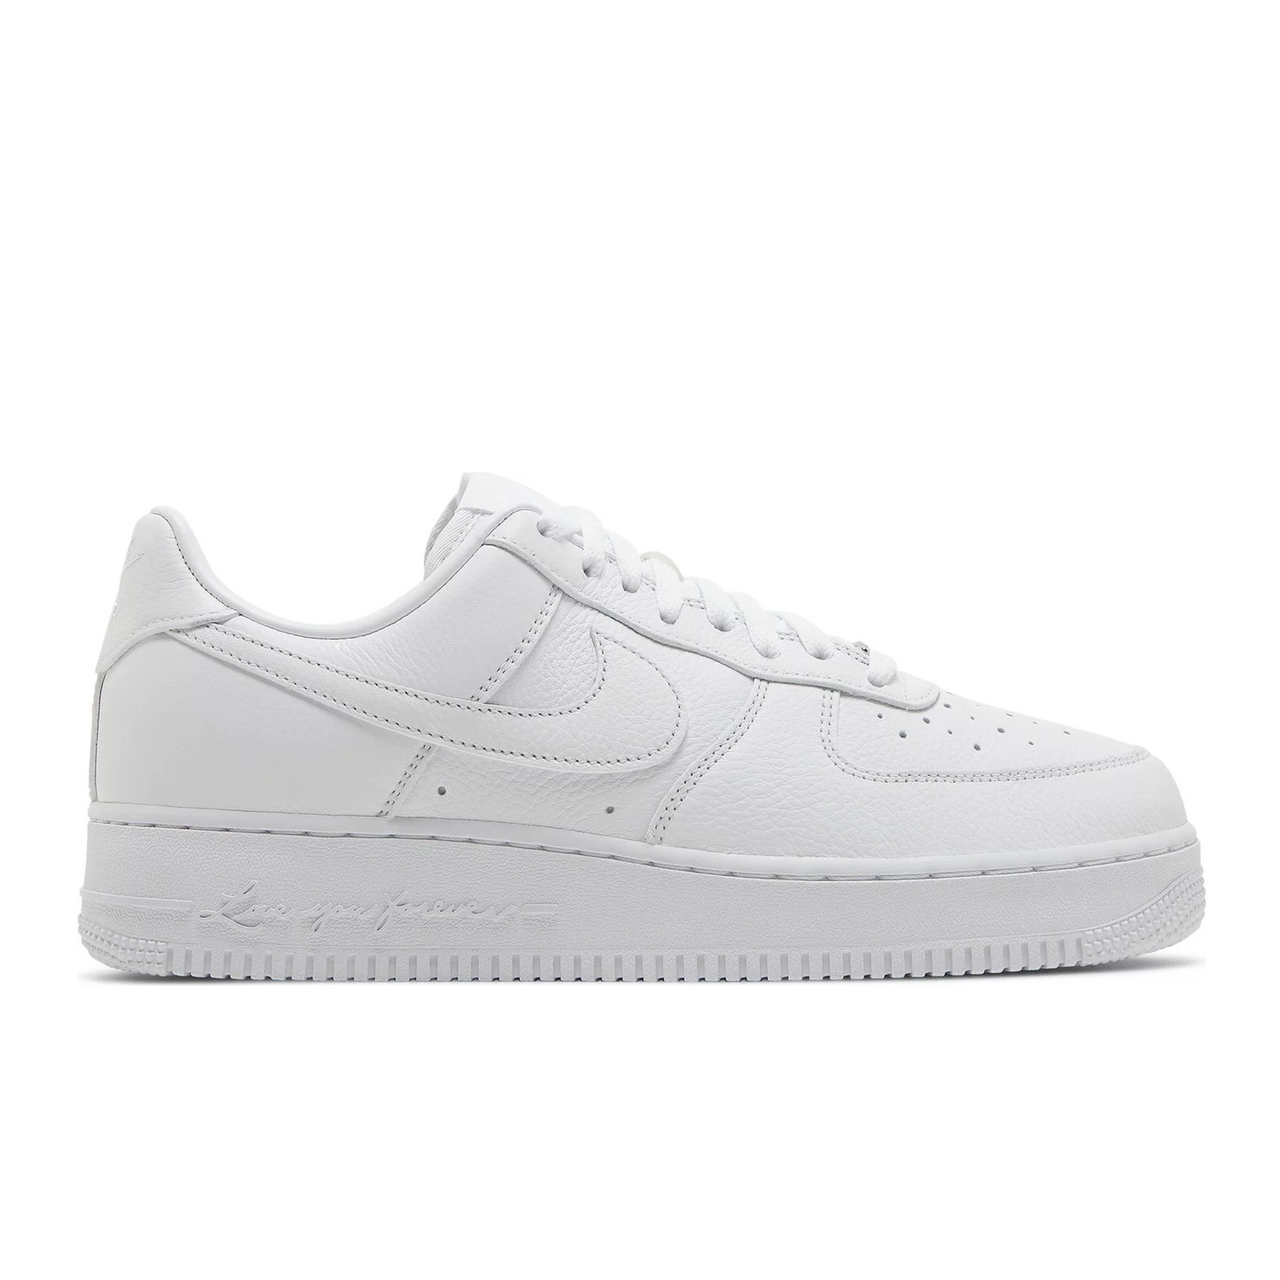 Nike x Nocta Air Force 1 Low Certified Lover Boy White (2022)